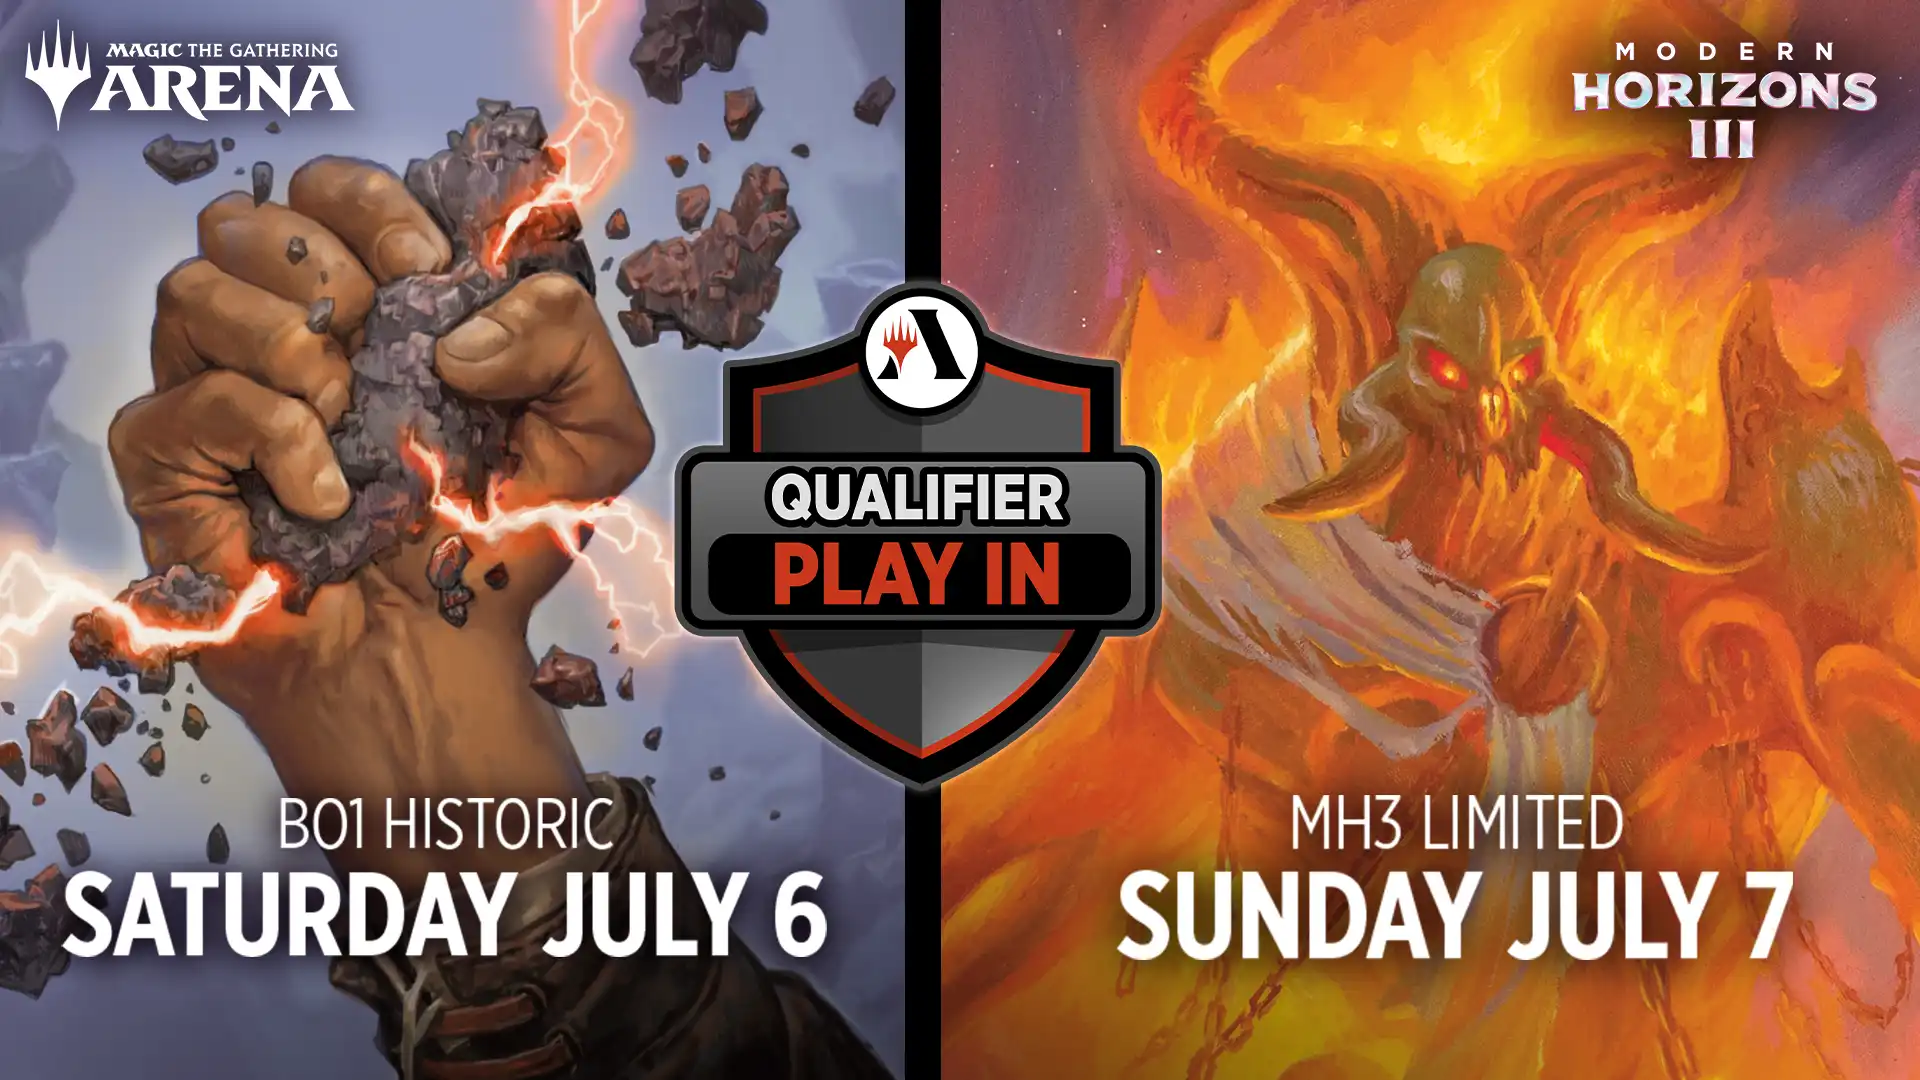 July 6 Historic Best-of-One Qualifier Play-In and July 7 bonus Sealed Modern Horizons 3 Play-In